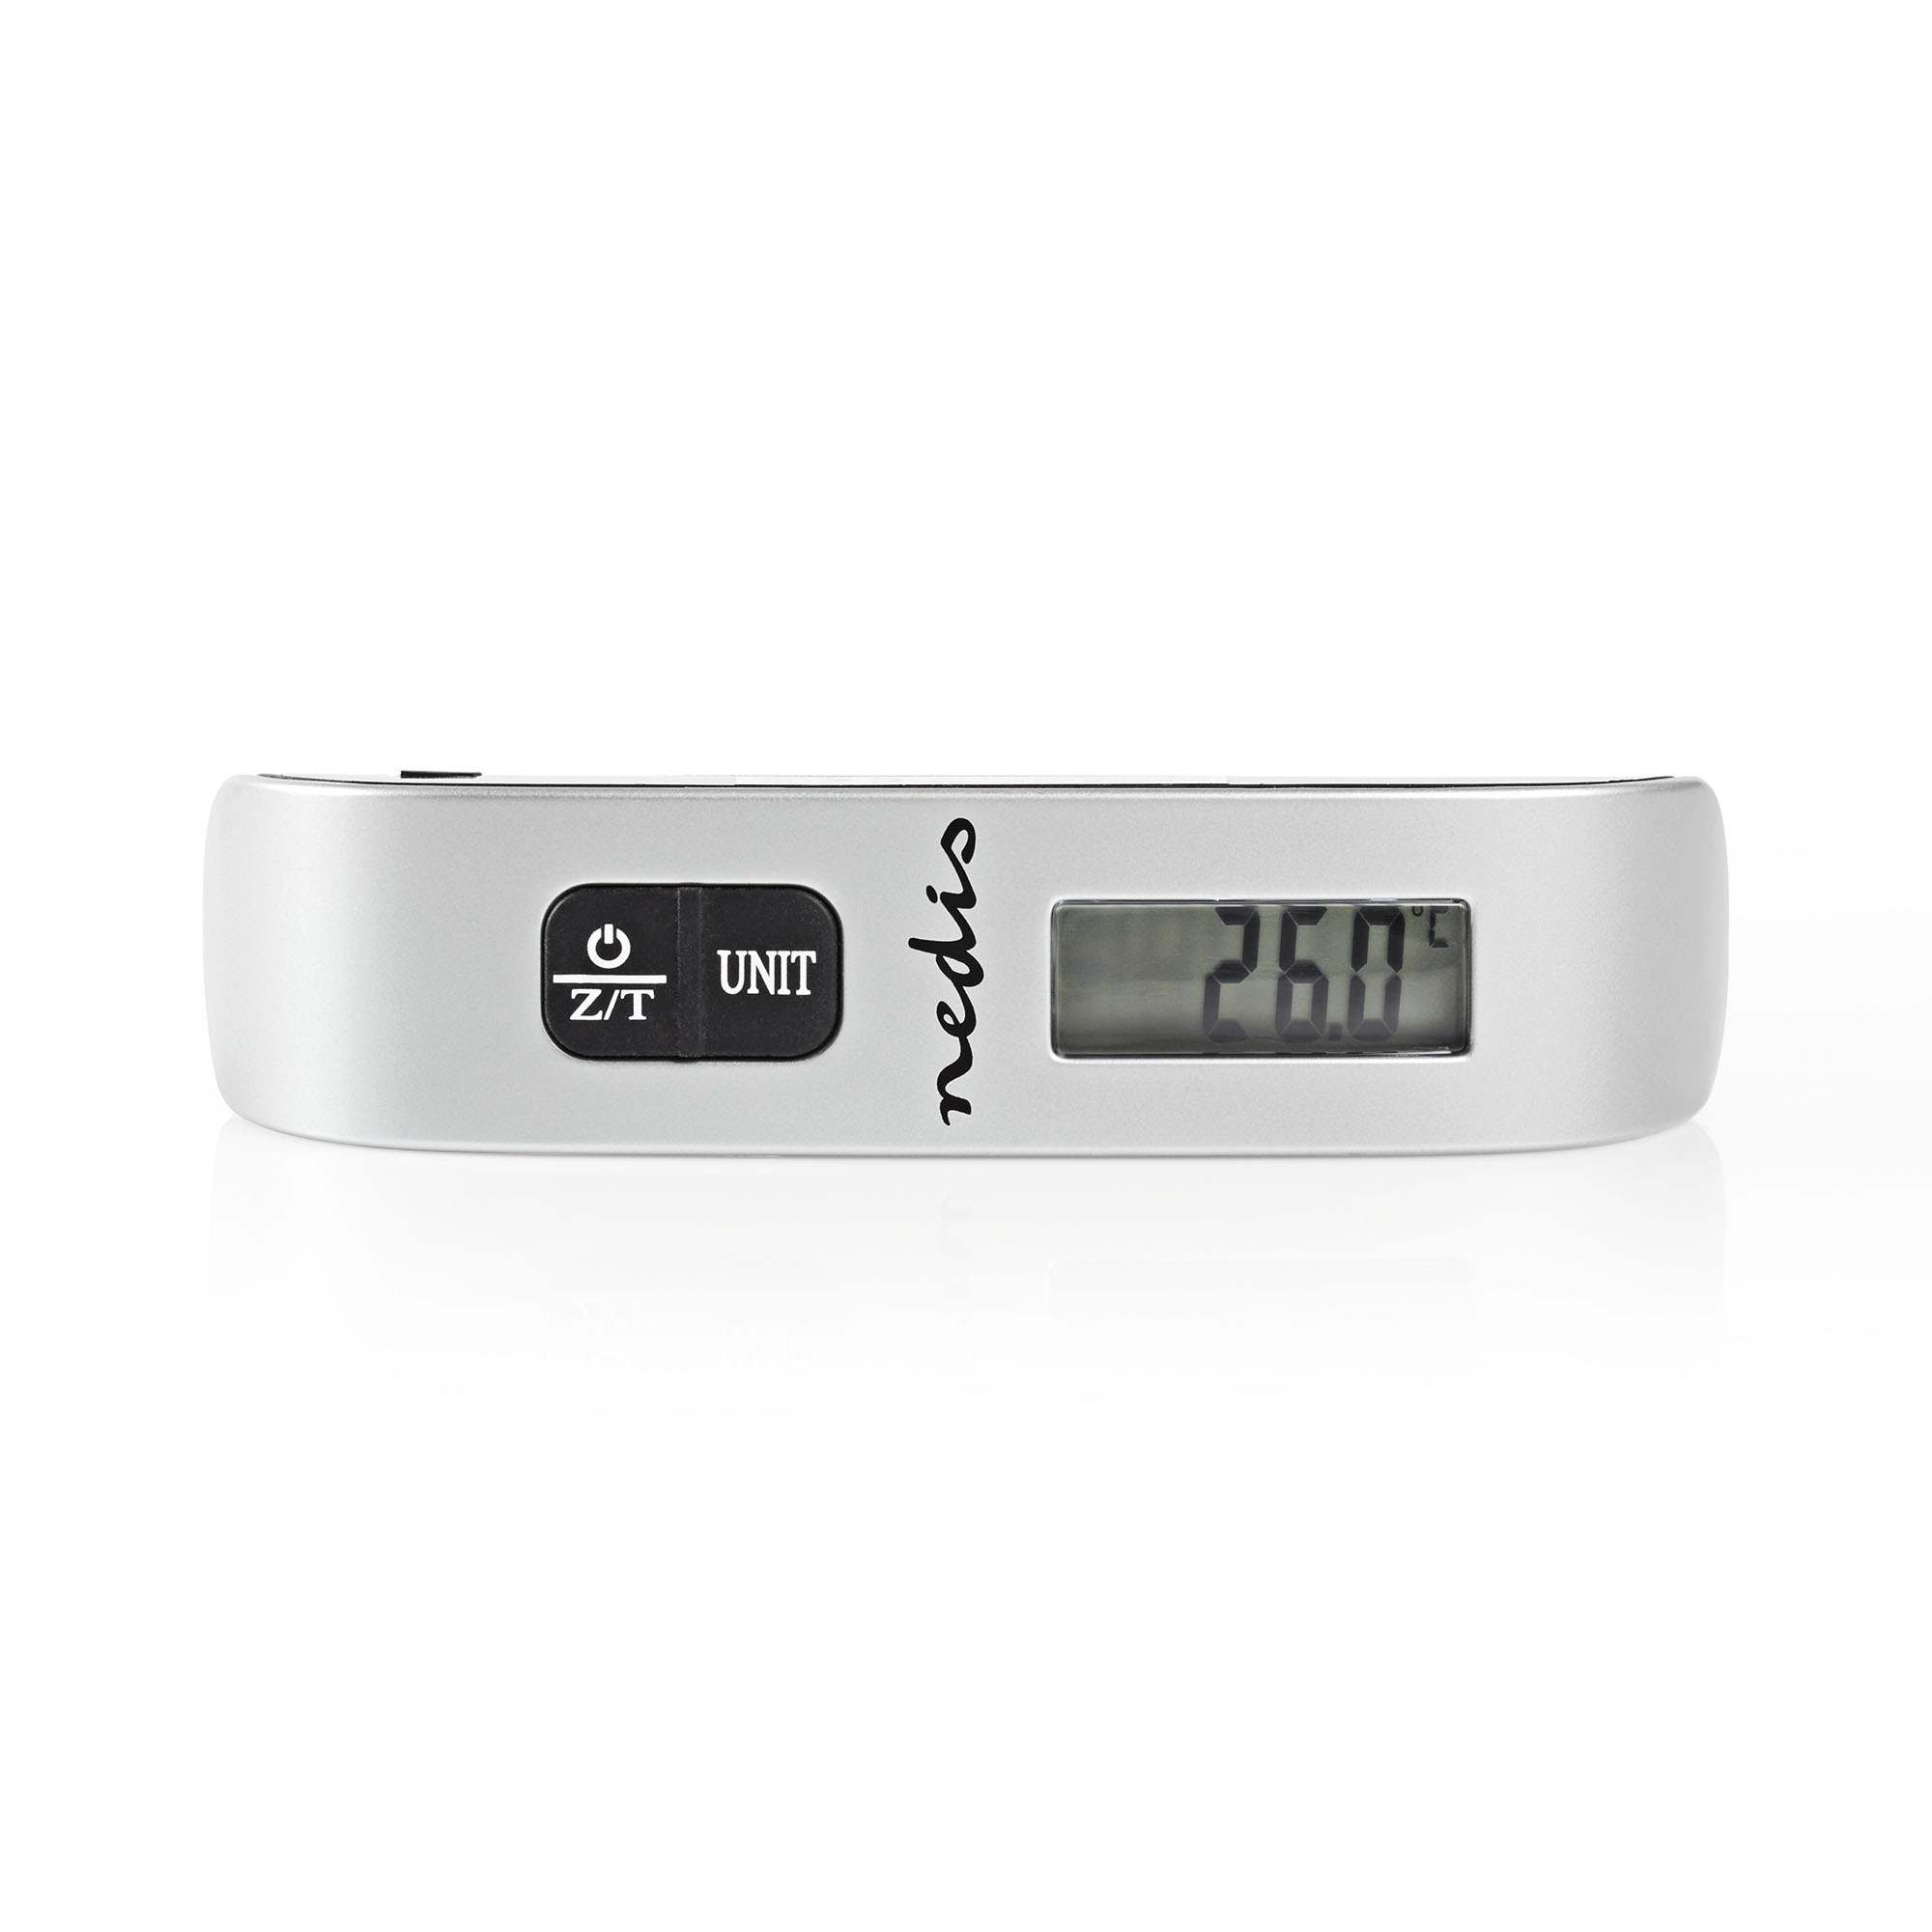 Nedis Digital Luggage Scale & Thermometer 